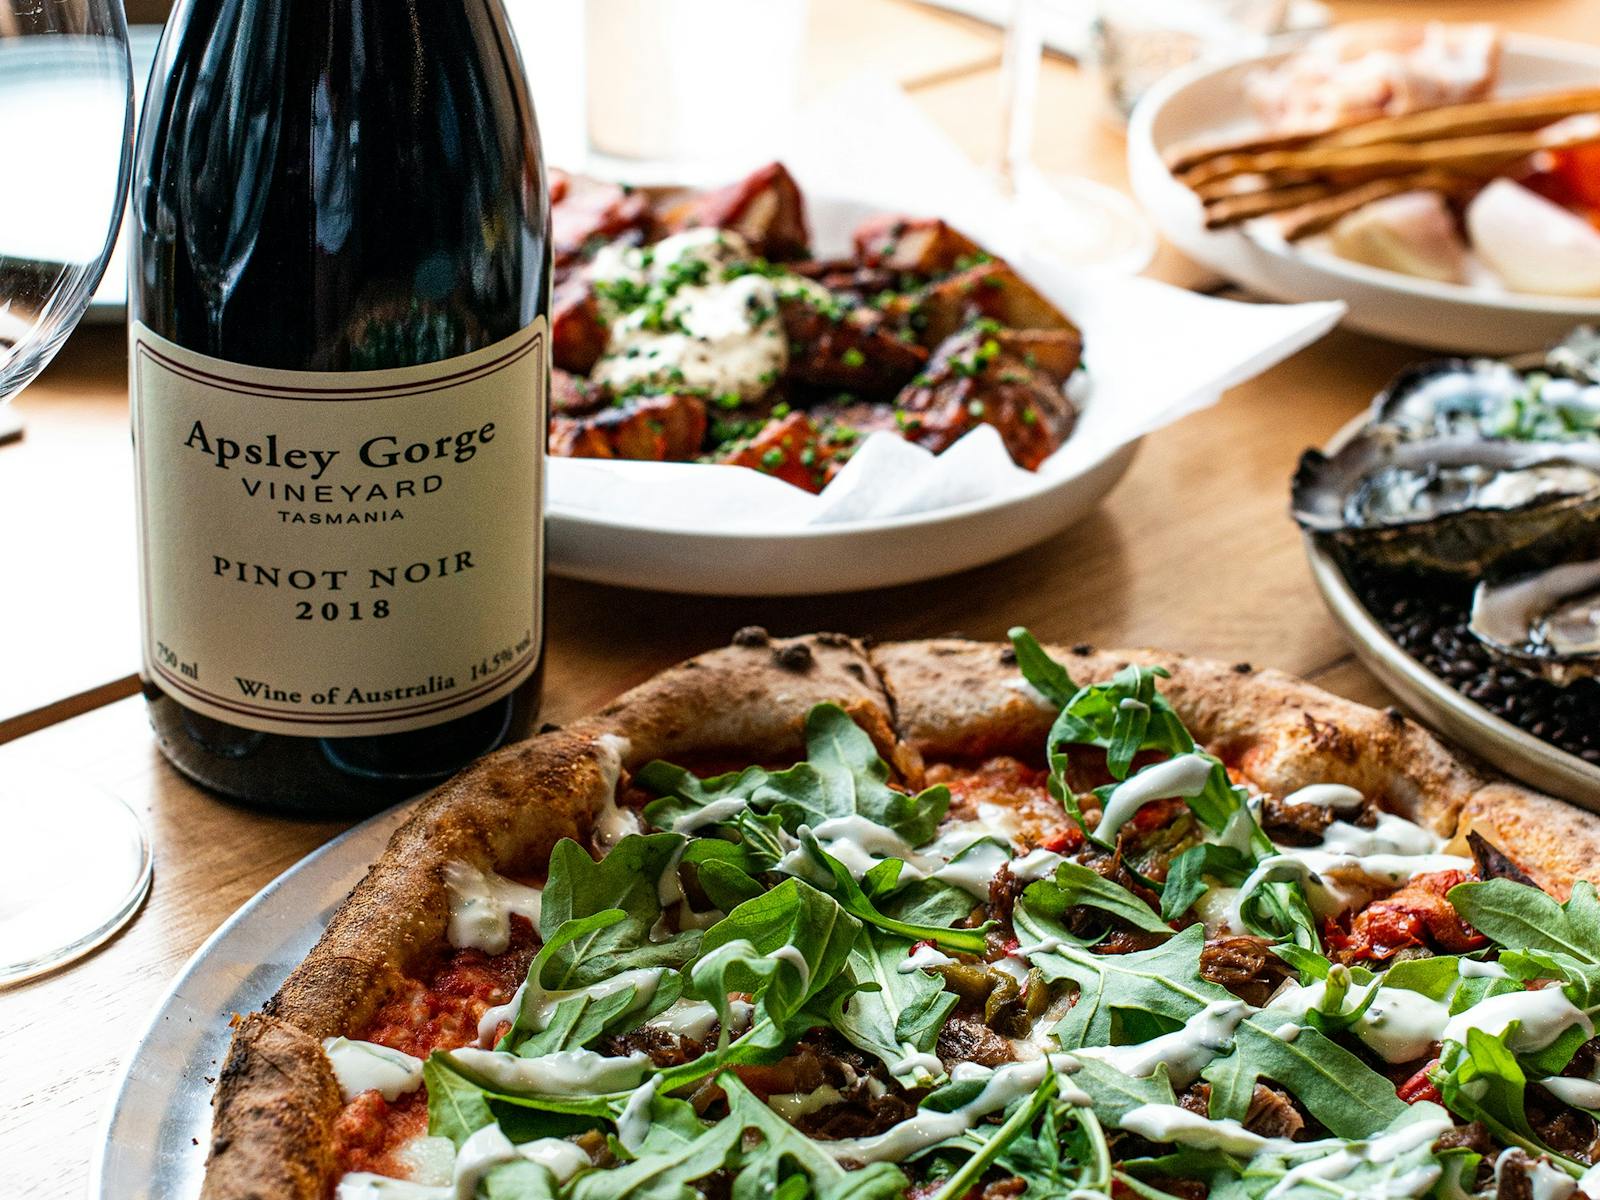 A delicious looking pizza and a bottle of red wine